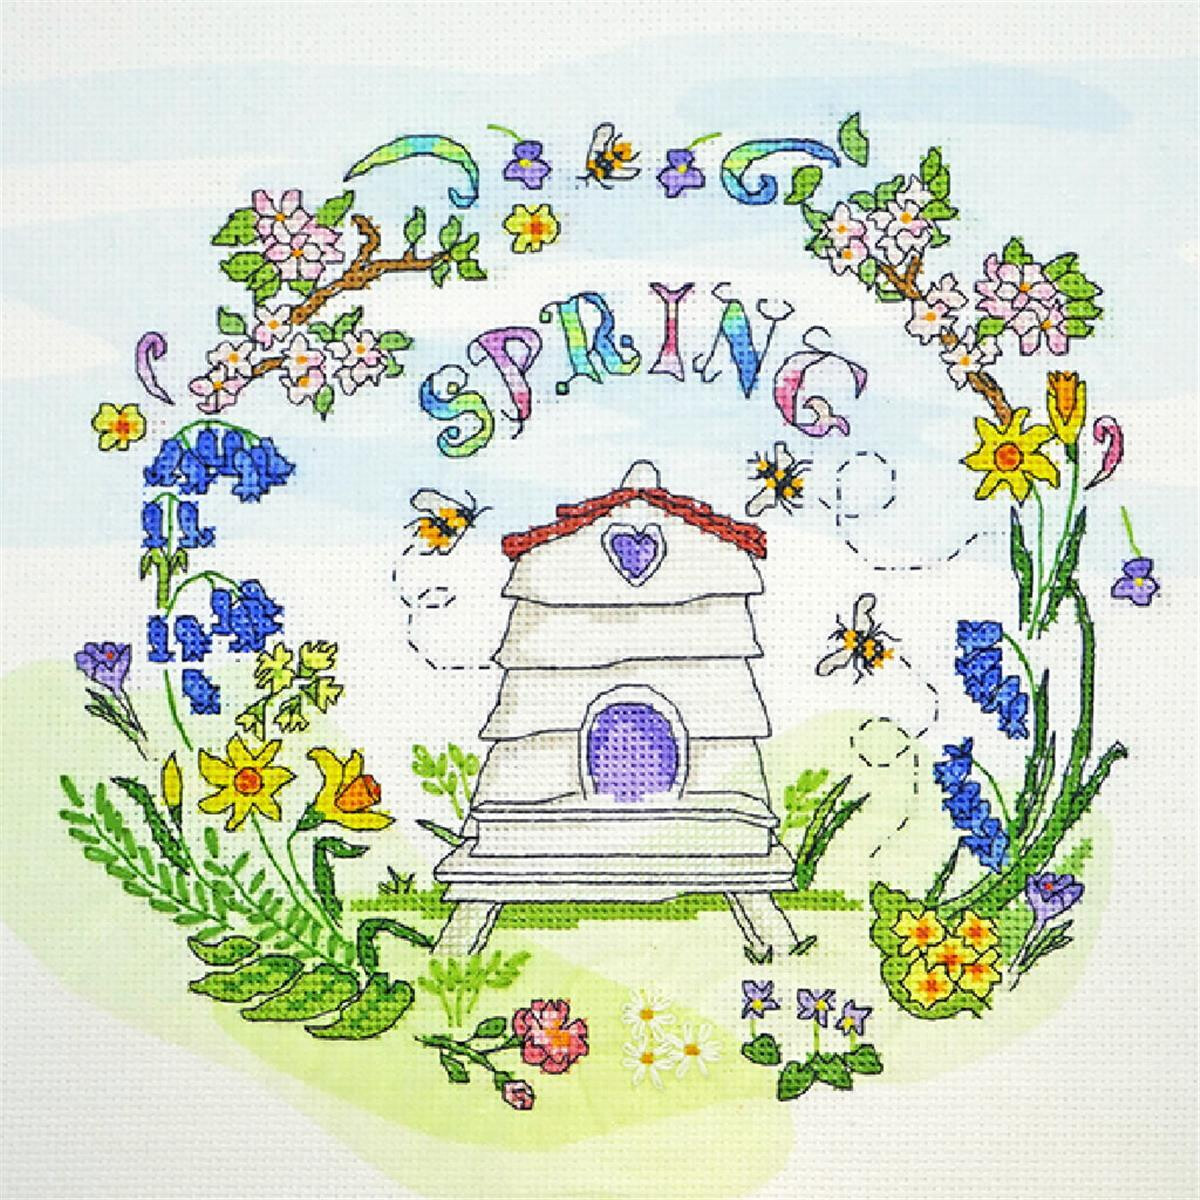 A colorful cross stitch embroidery pack design from Bothy...